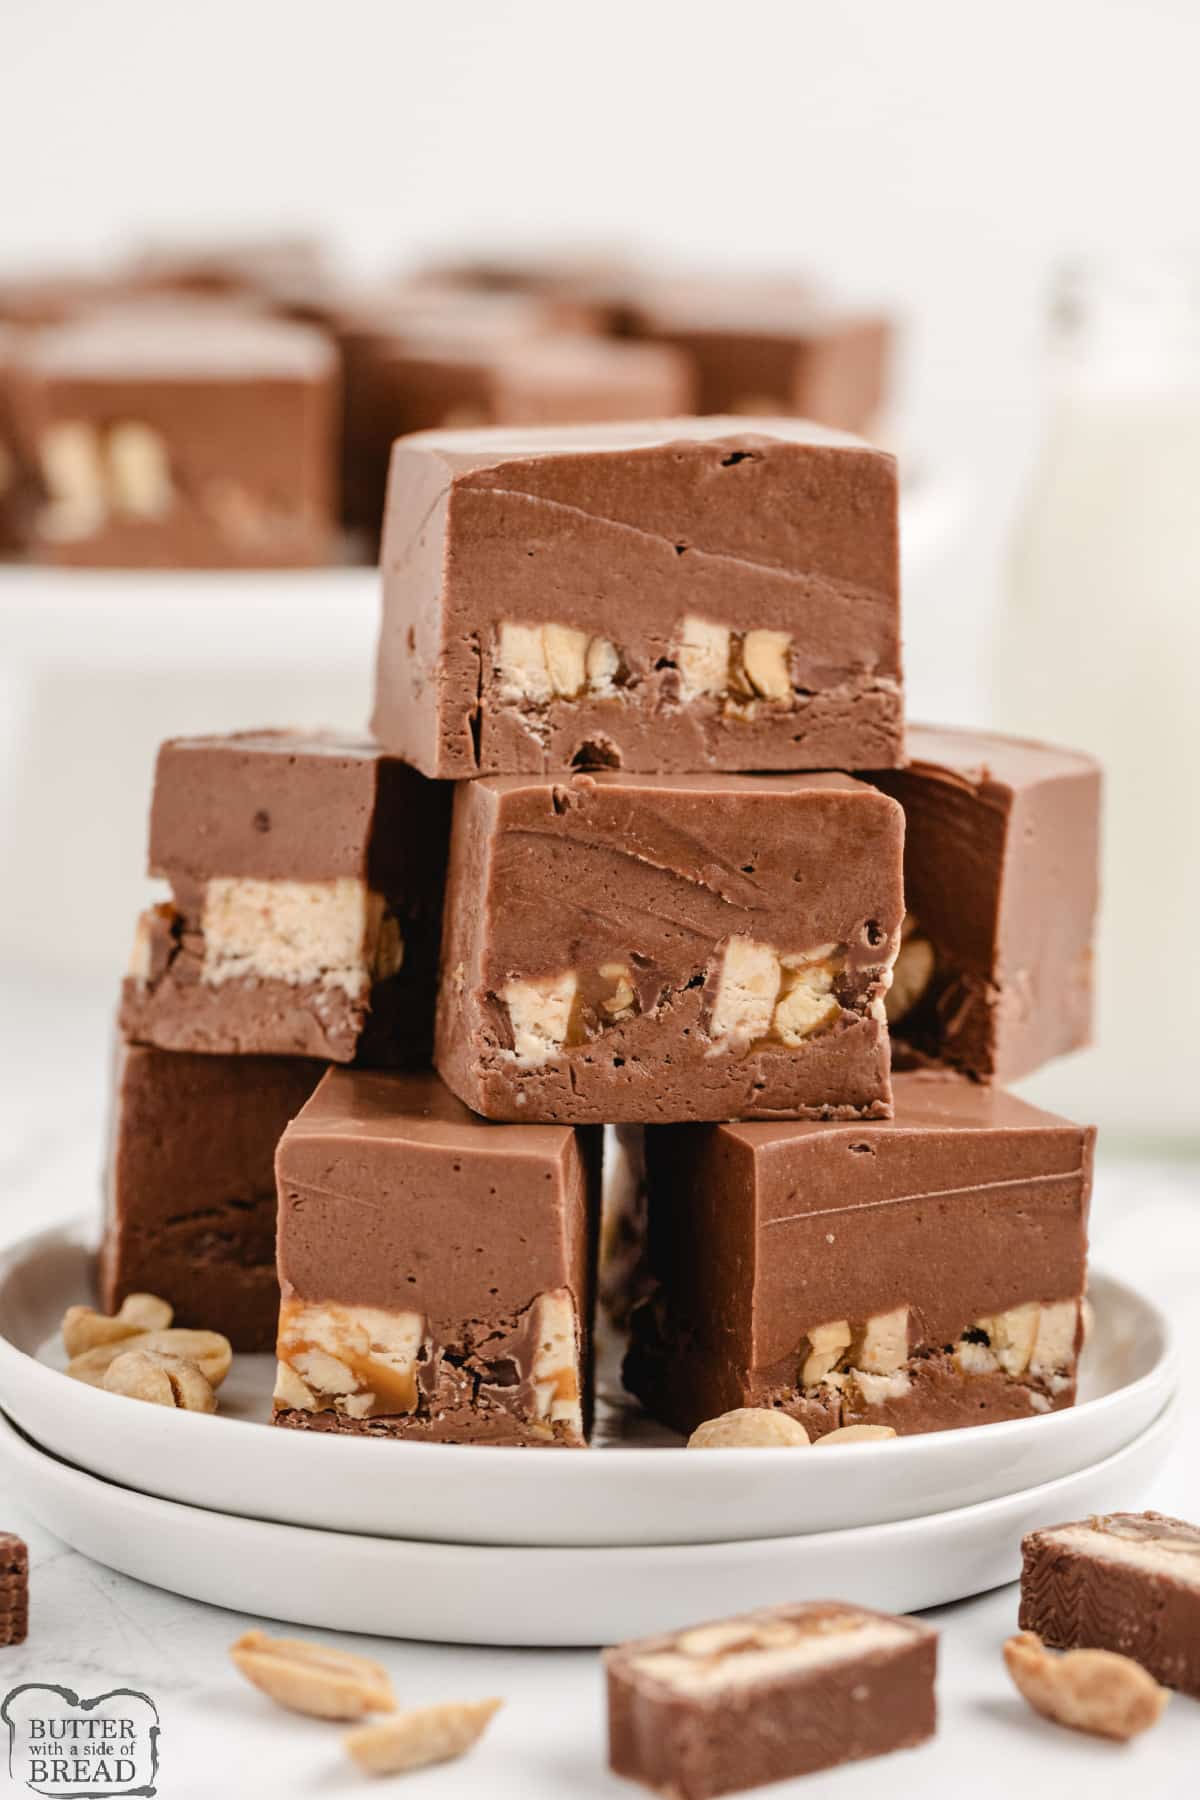 Snickers Fudge takes a traditional marshmallow cream fudge recipe to the next level by adding sliced Snickers bars in the middle! This rich and creamy fudge recipe is easy to make and absolutely delicious to eat. 